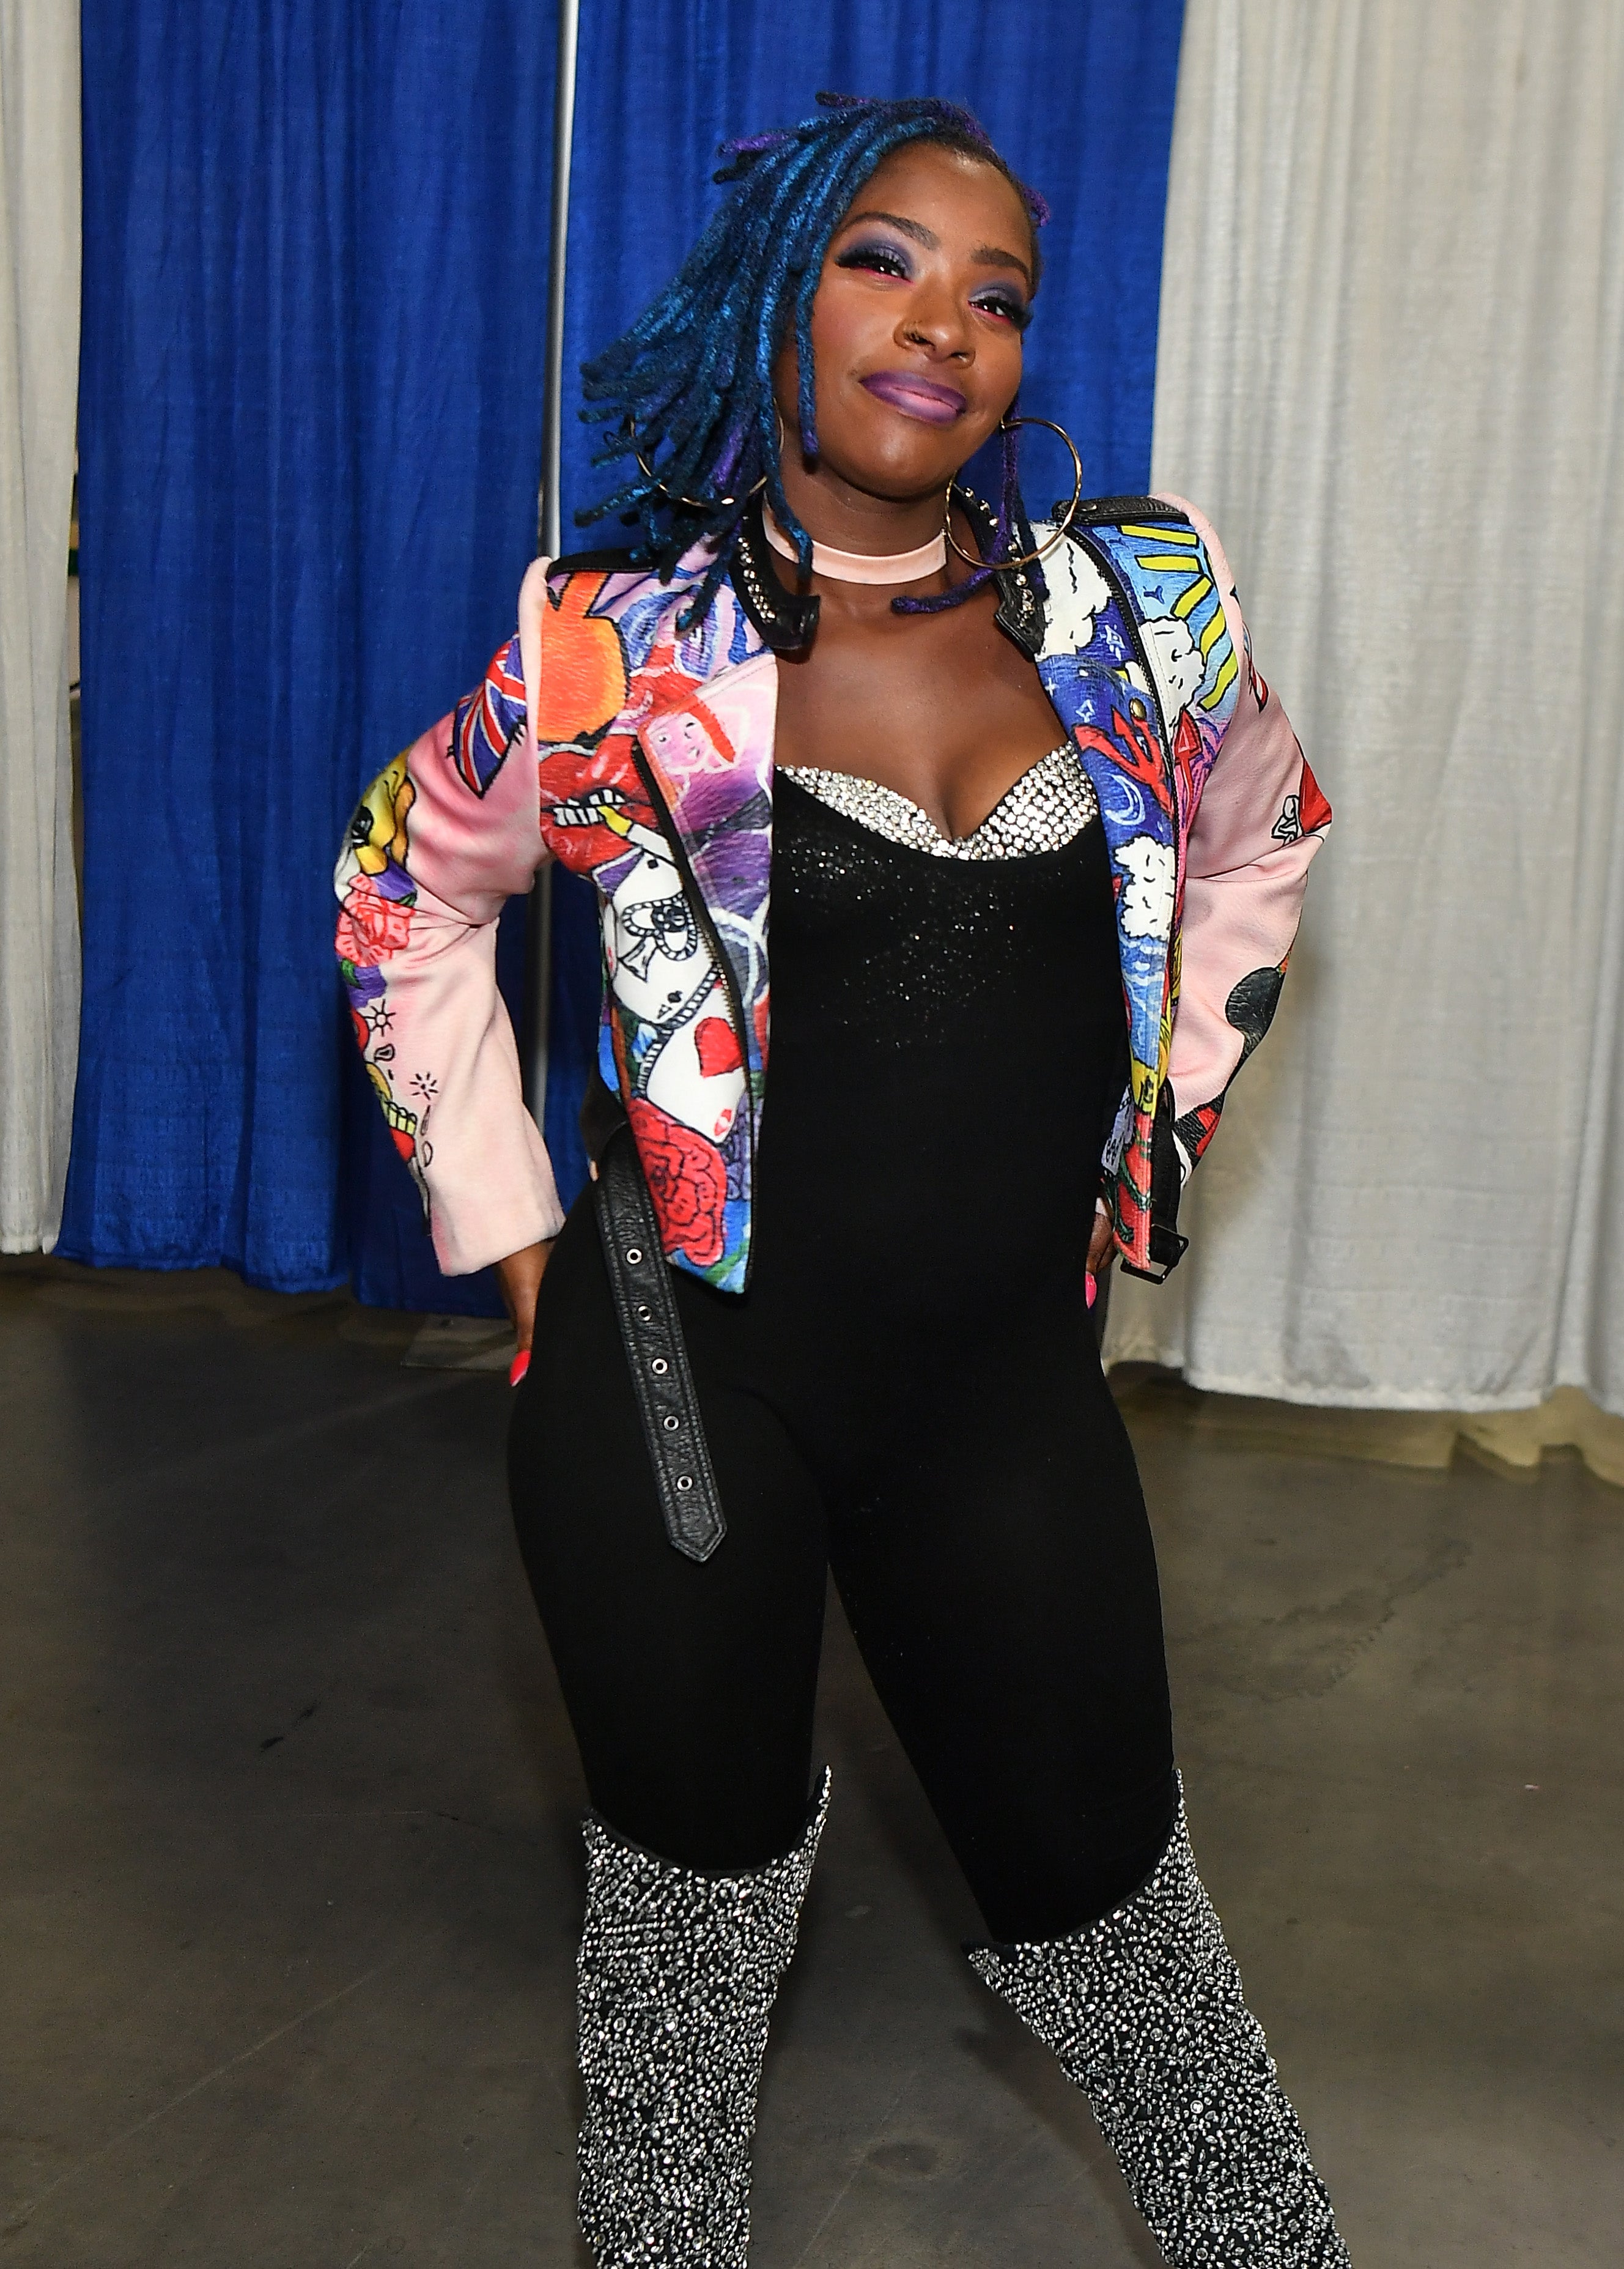 Beauty Moments From The Bronner Bros. International Beauty Show In Atlanta